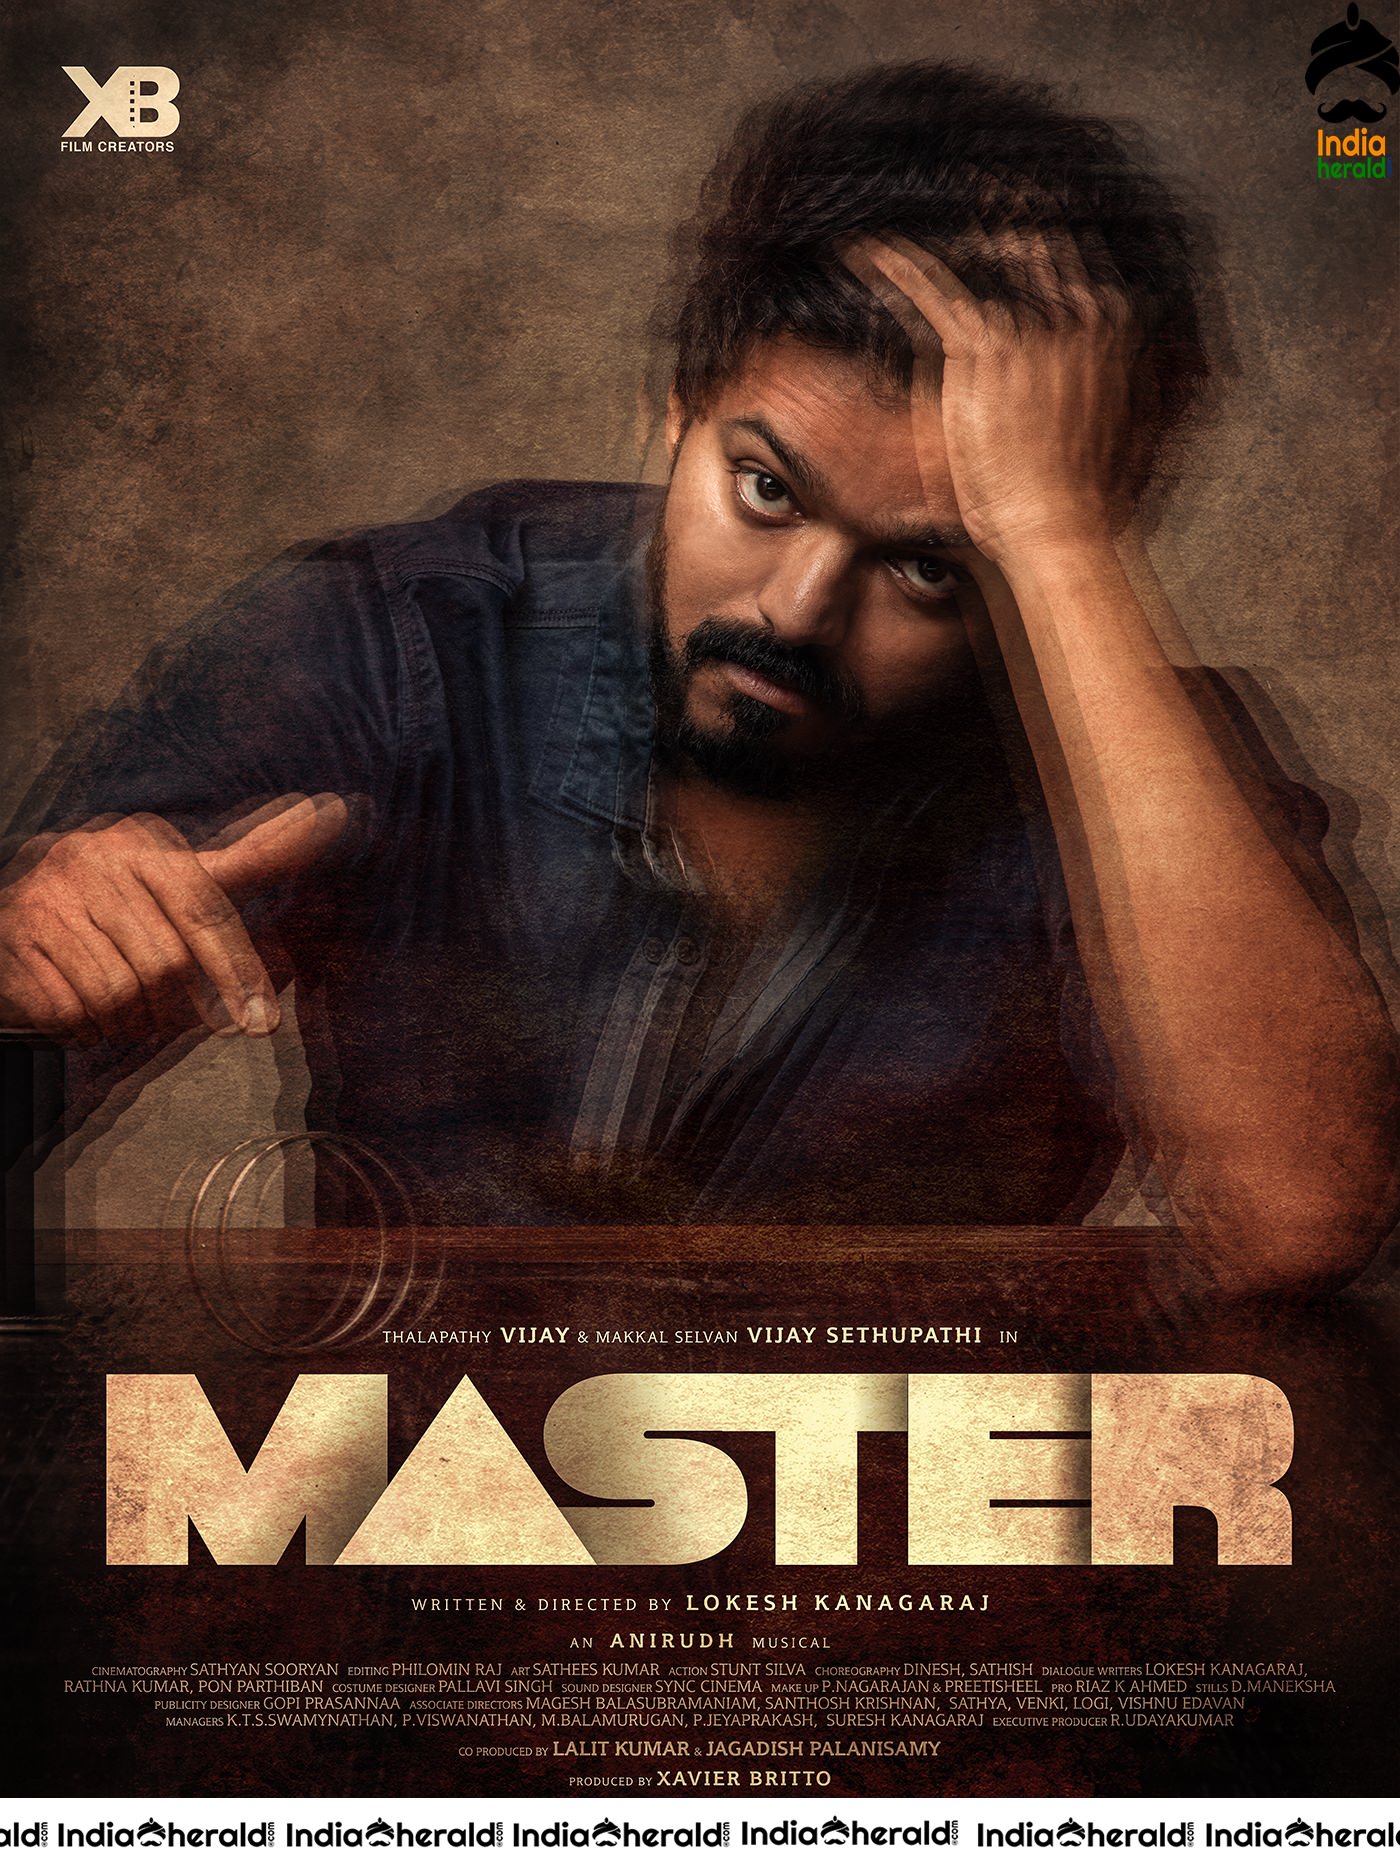 Vijay 64 titled as MASTER First Look Poster